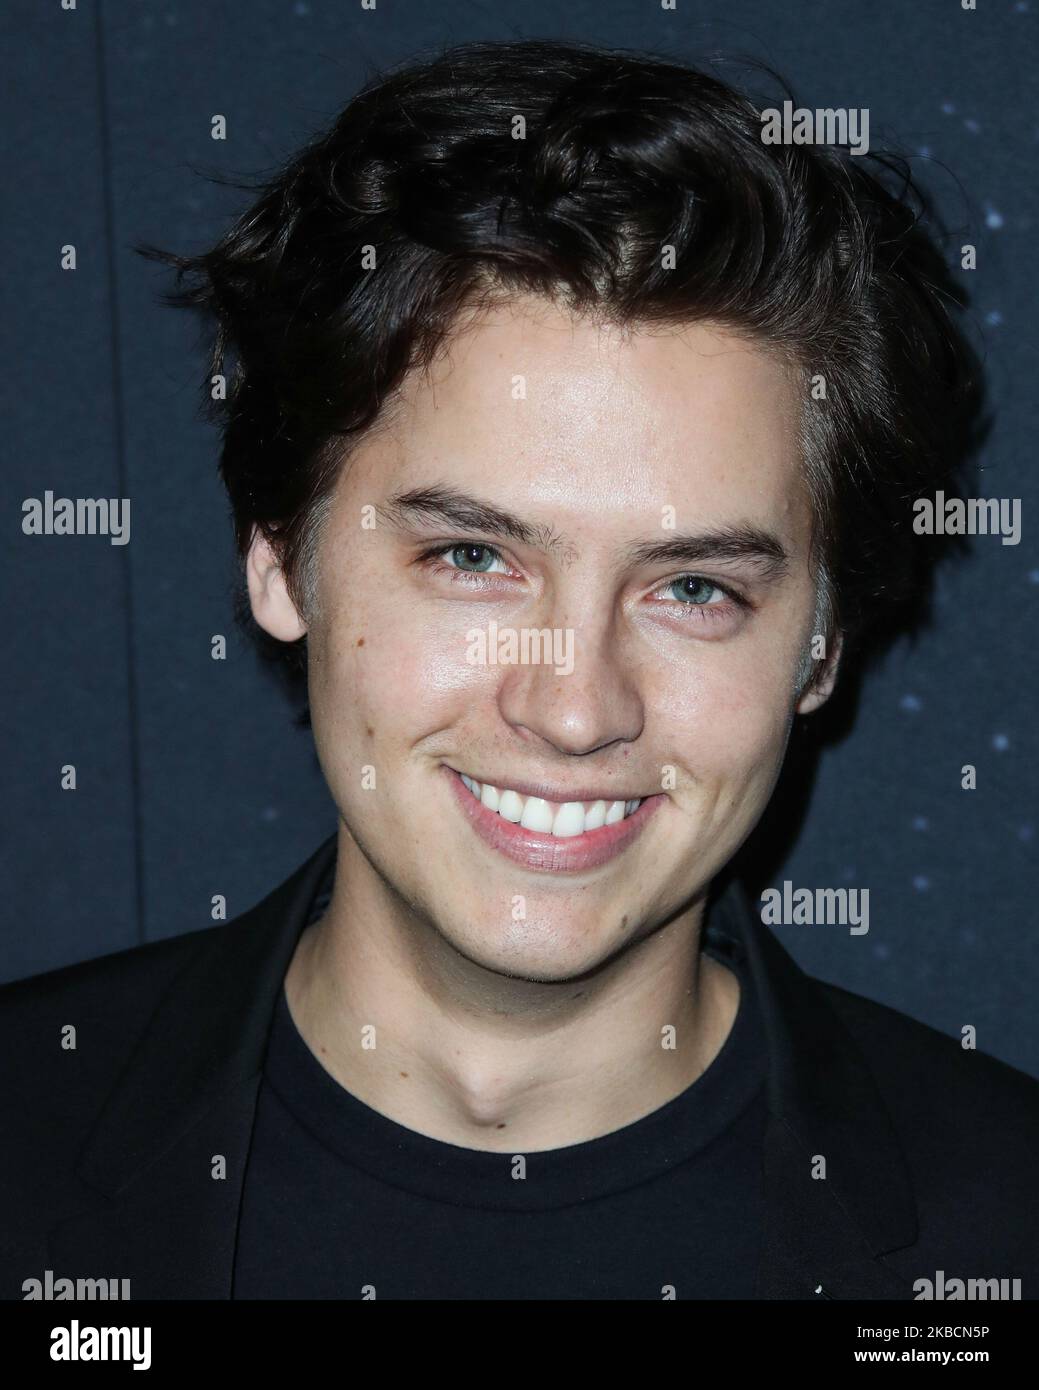 HOLLYWOOD, LOS ANGELES, CALIFORNIA, USA - DECEMBER 11: Actor Cole Sprouse arrives at the Los Angeles Premiere Of A24's 'Uncut Gems' held at the ArcLight Cinerama Dome on December 11, 2019 in Hollywood, Los Angeles, California, United States. (Photo by Xavier Collin/Image Press Agency/NurPhoto) Stock Photo